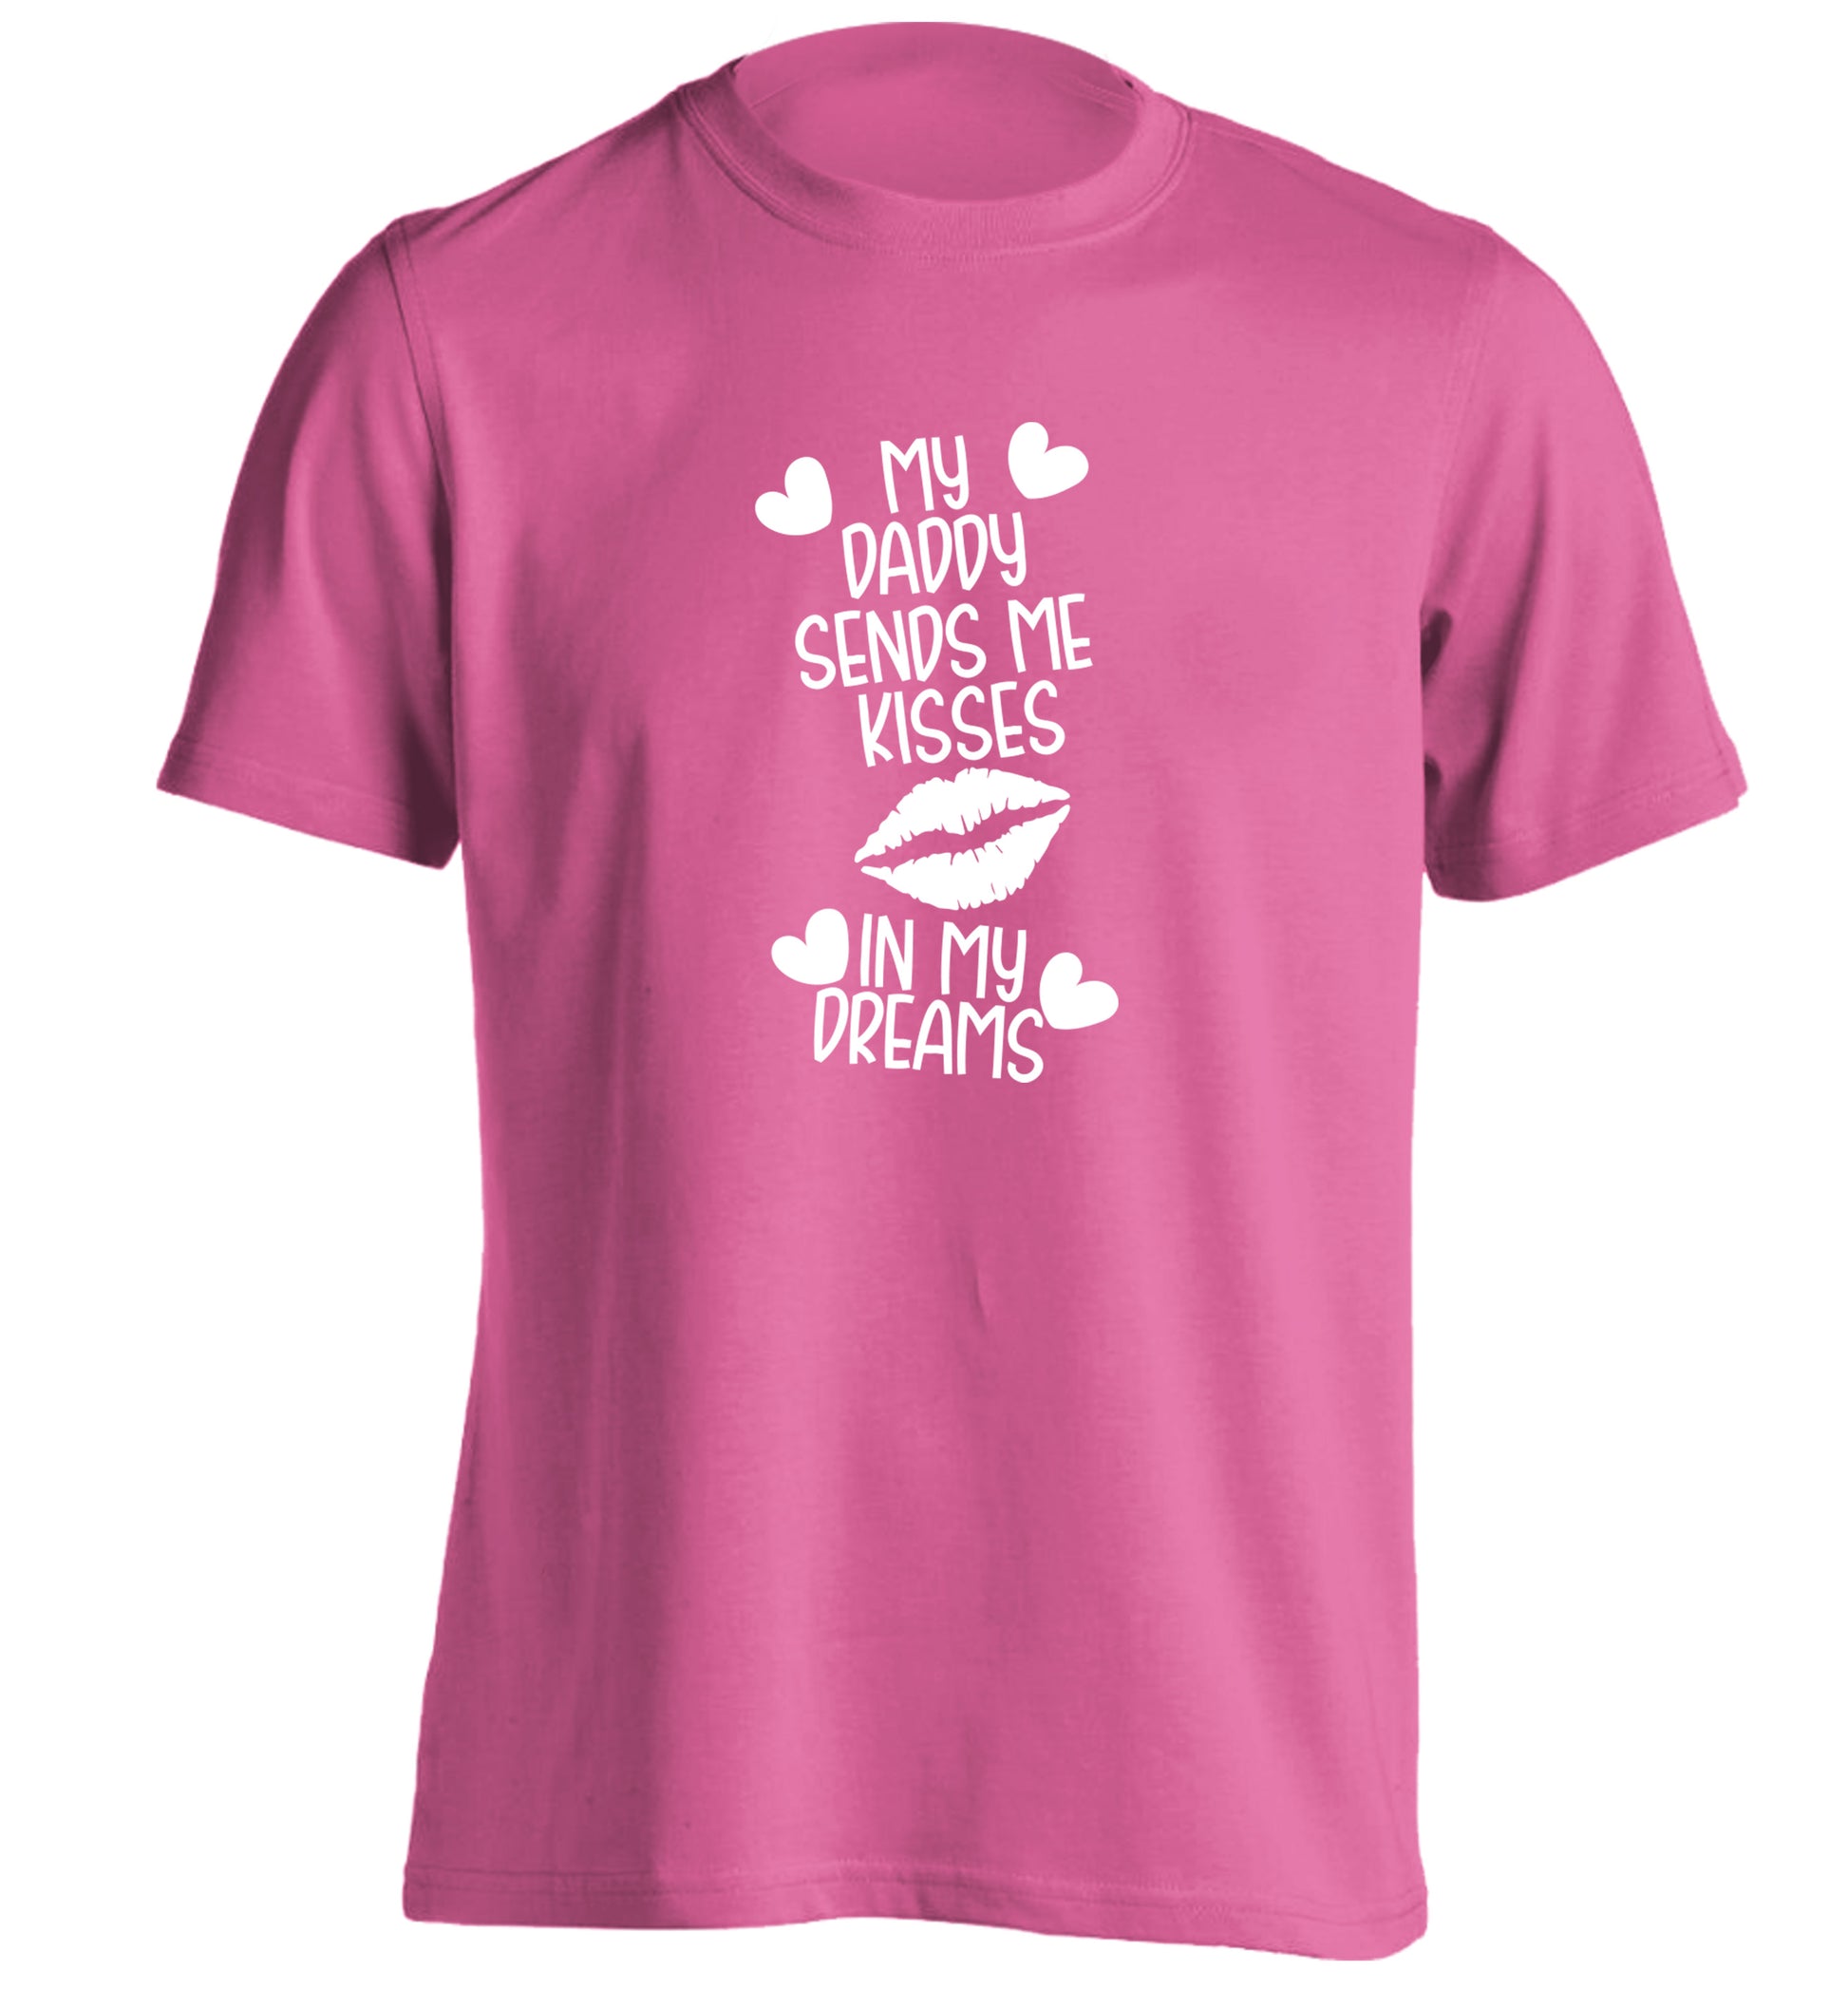 My daddy sends me kisses in my dreams adults unisex pink Tshirt 2XL